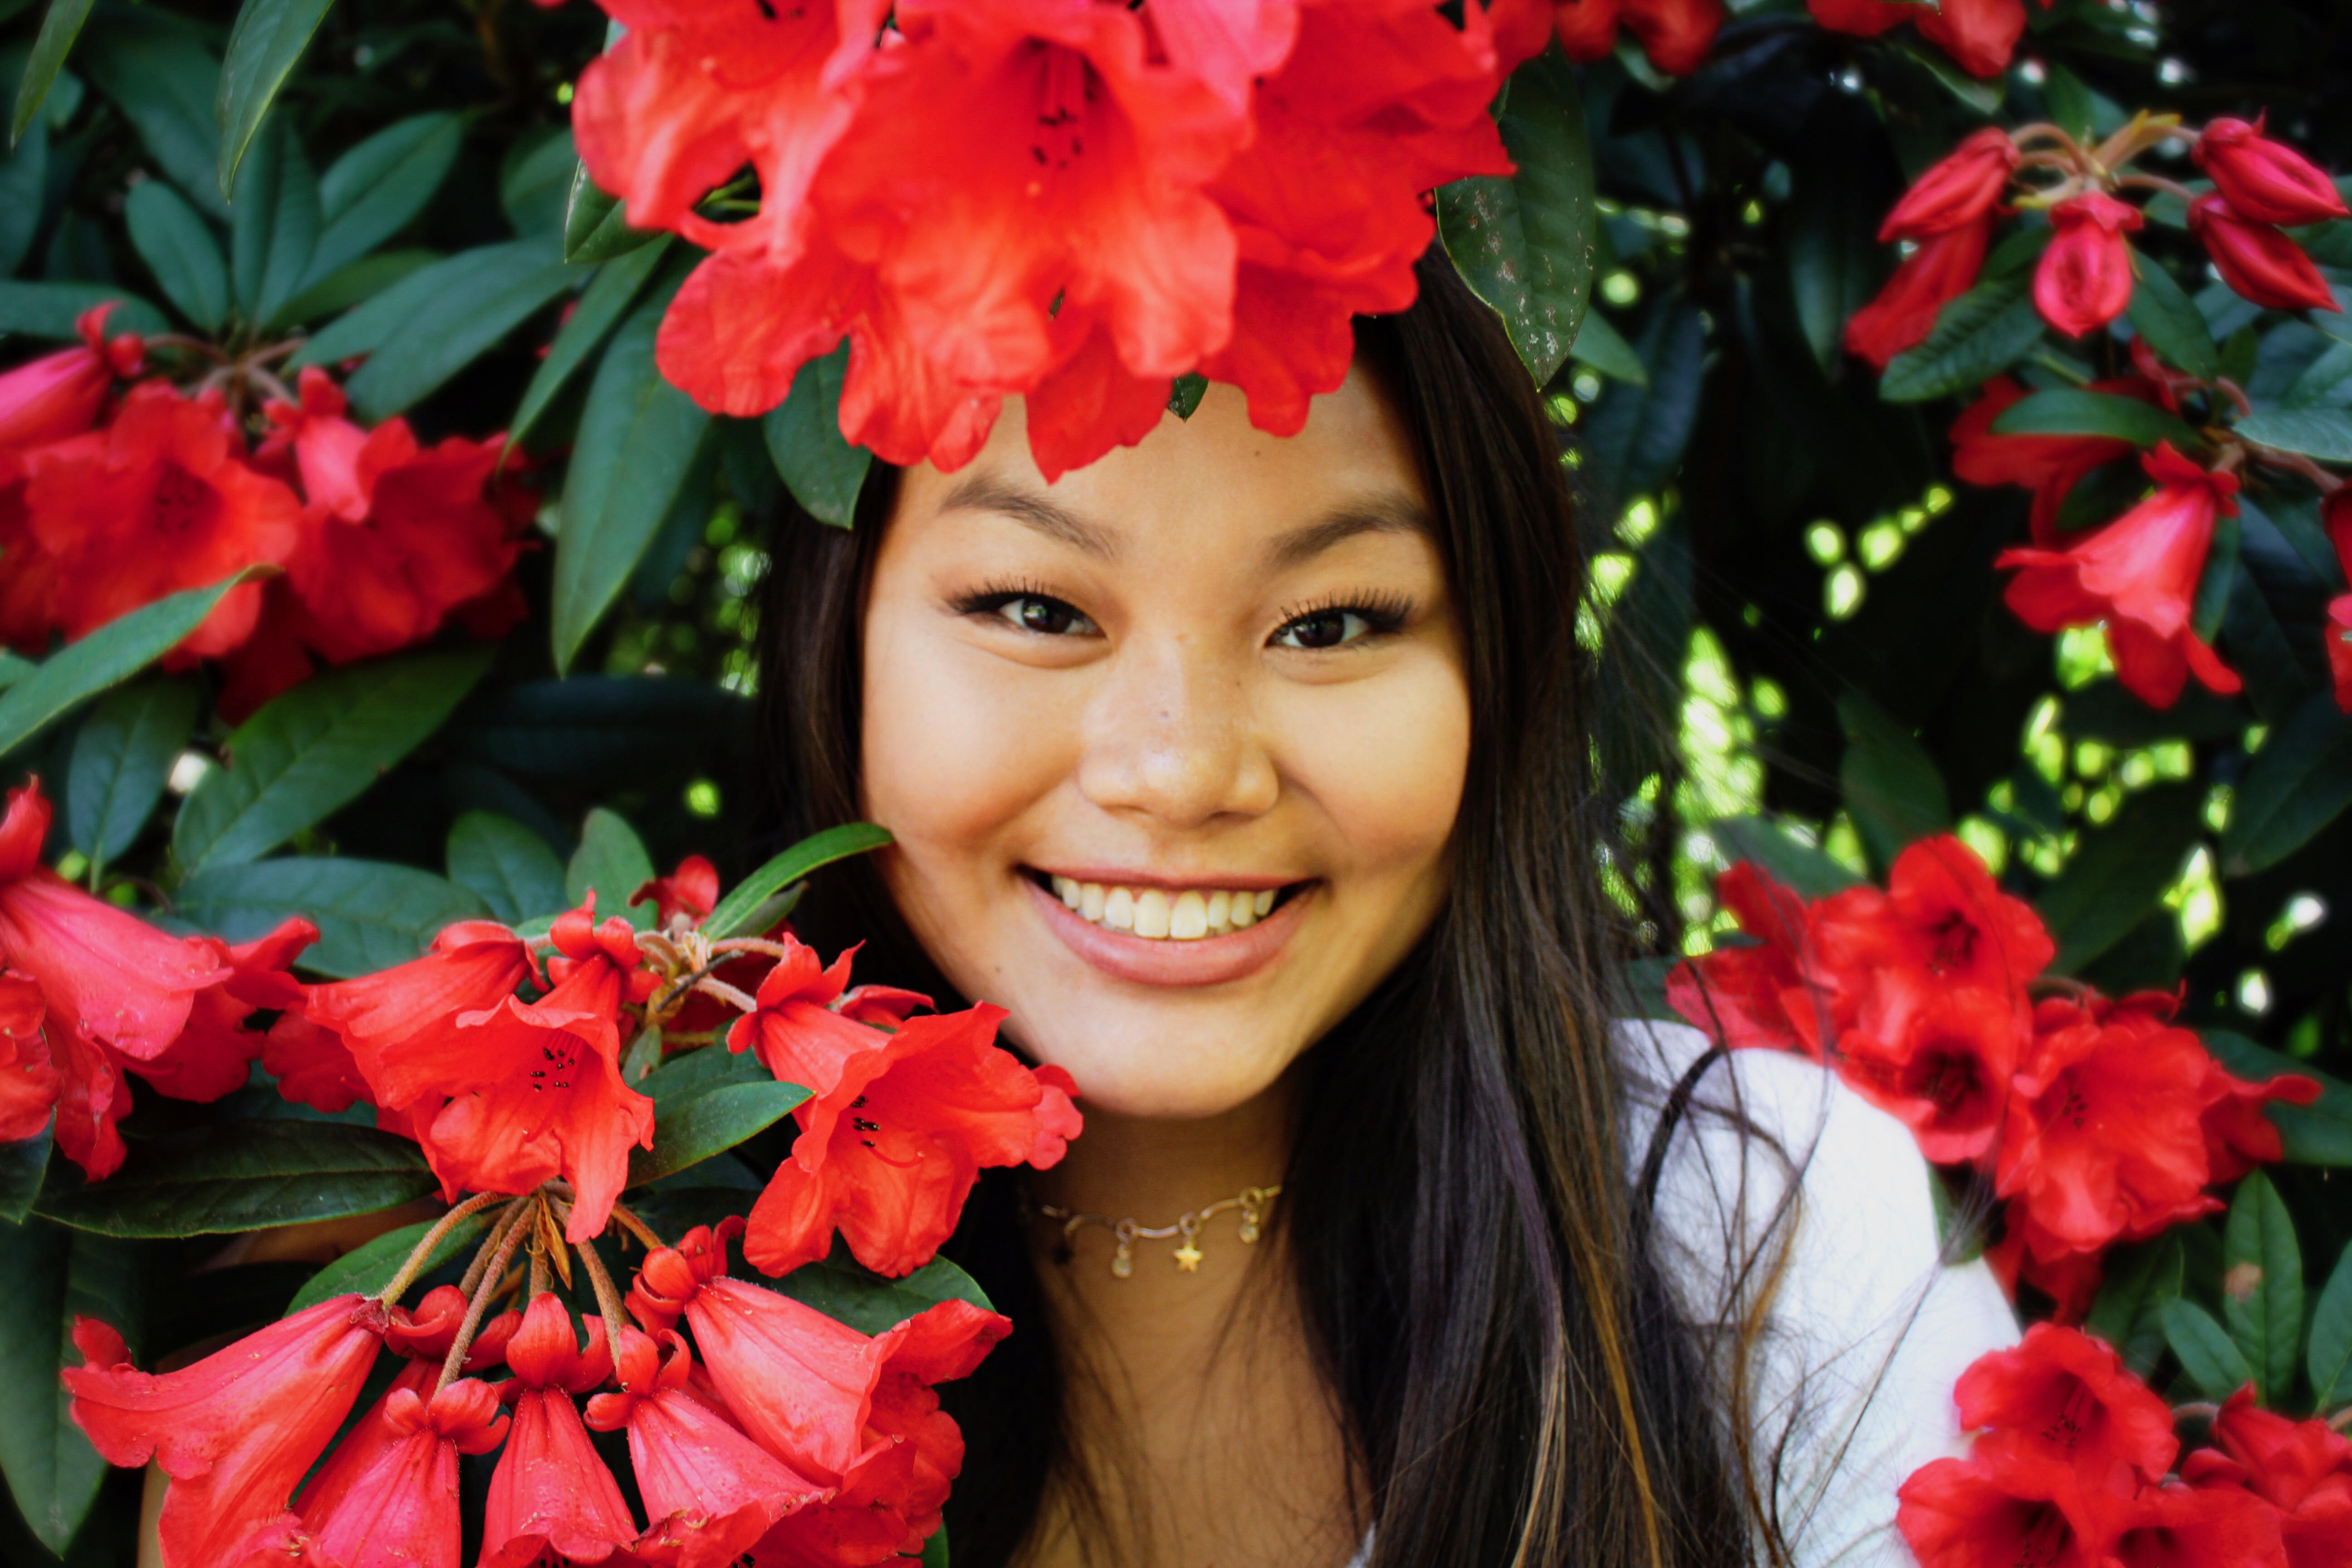 Clarkson student Jada Flanagan looks at the camera surrounded by beautiful red flowers.